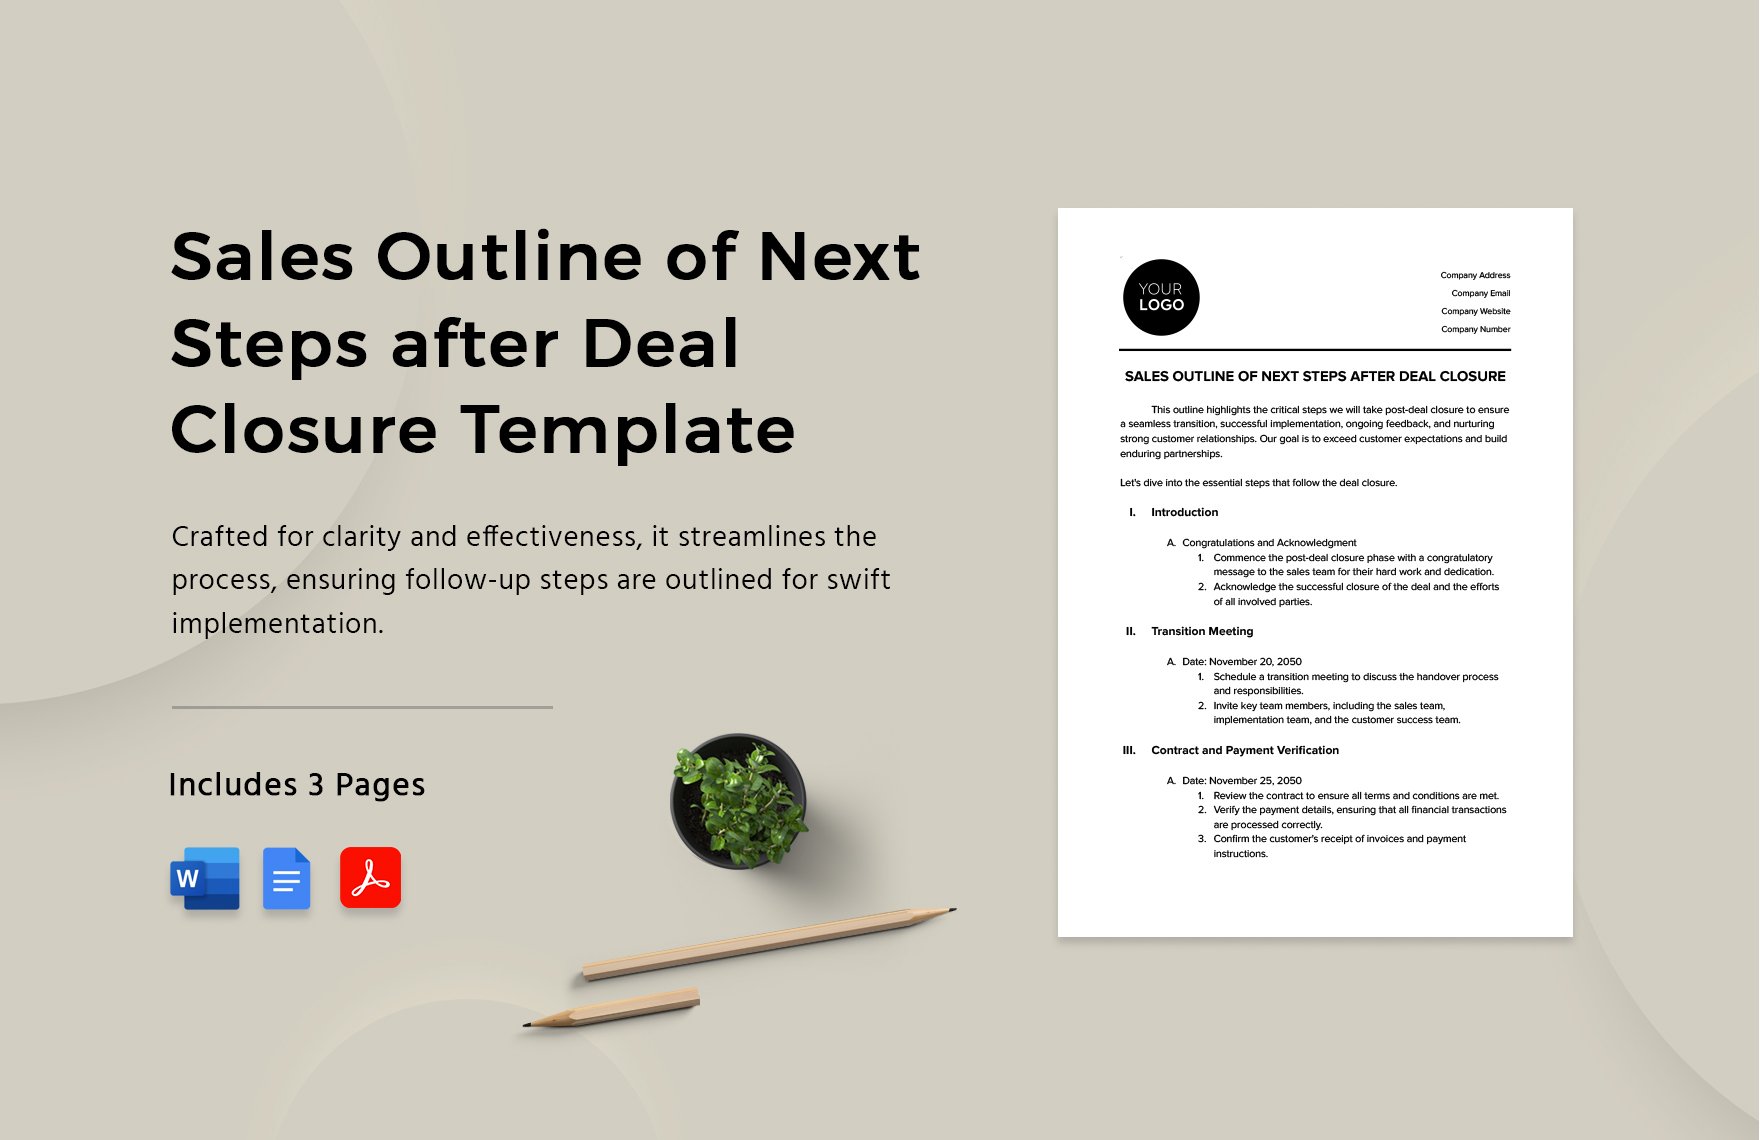 Sales Outline of Next Steps after Deal Closure Template